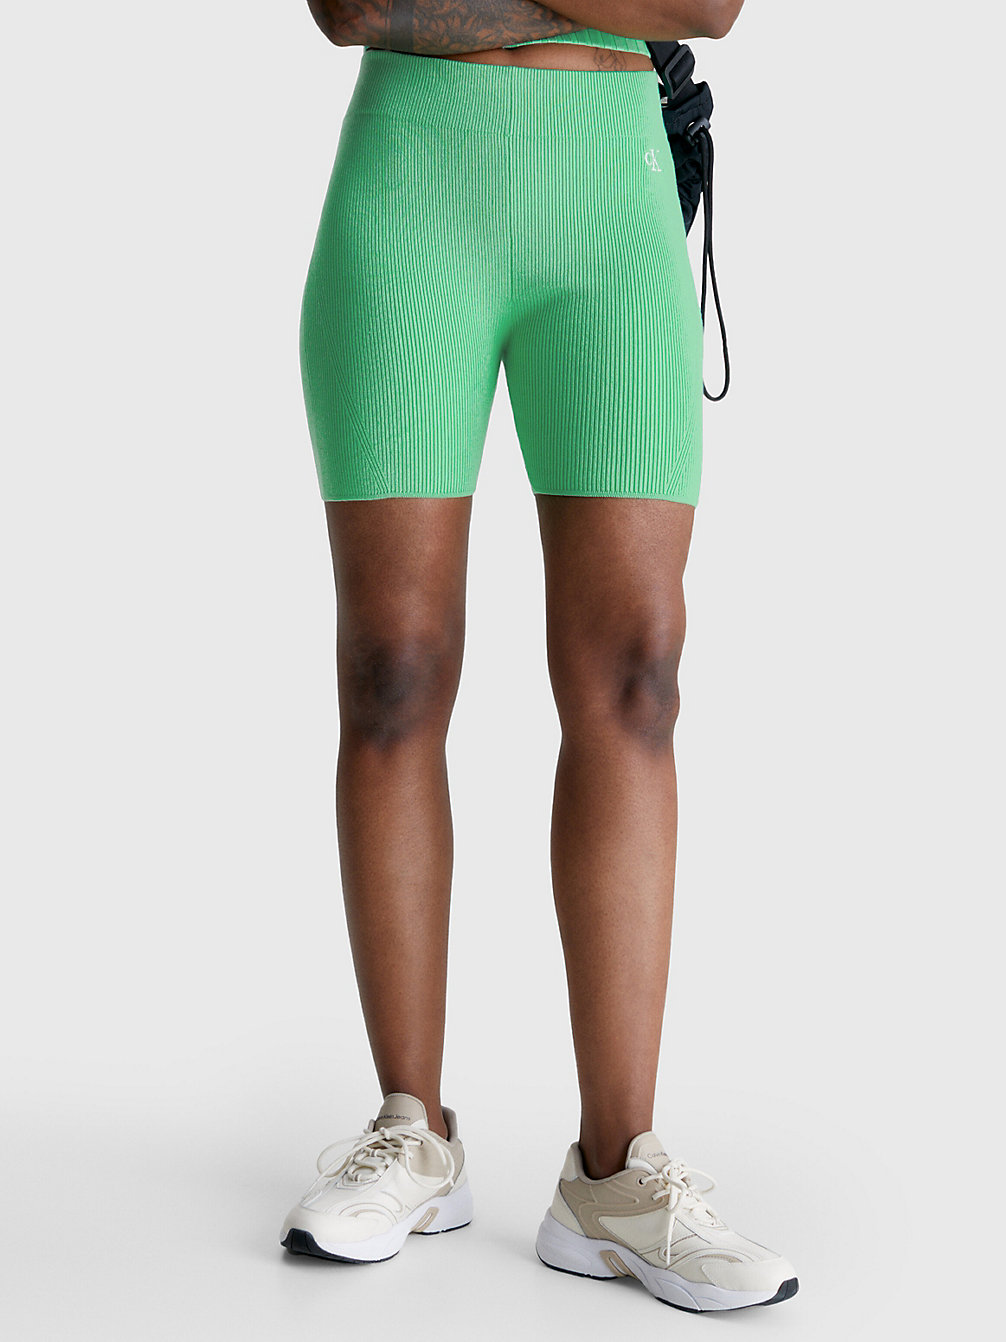 NEPTUNES WAVE Ribbed Cycling Shorts undefined women Calvin Klein